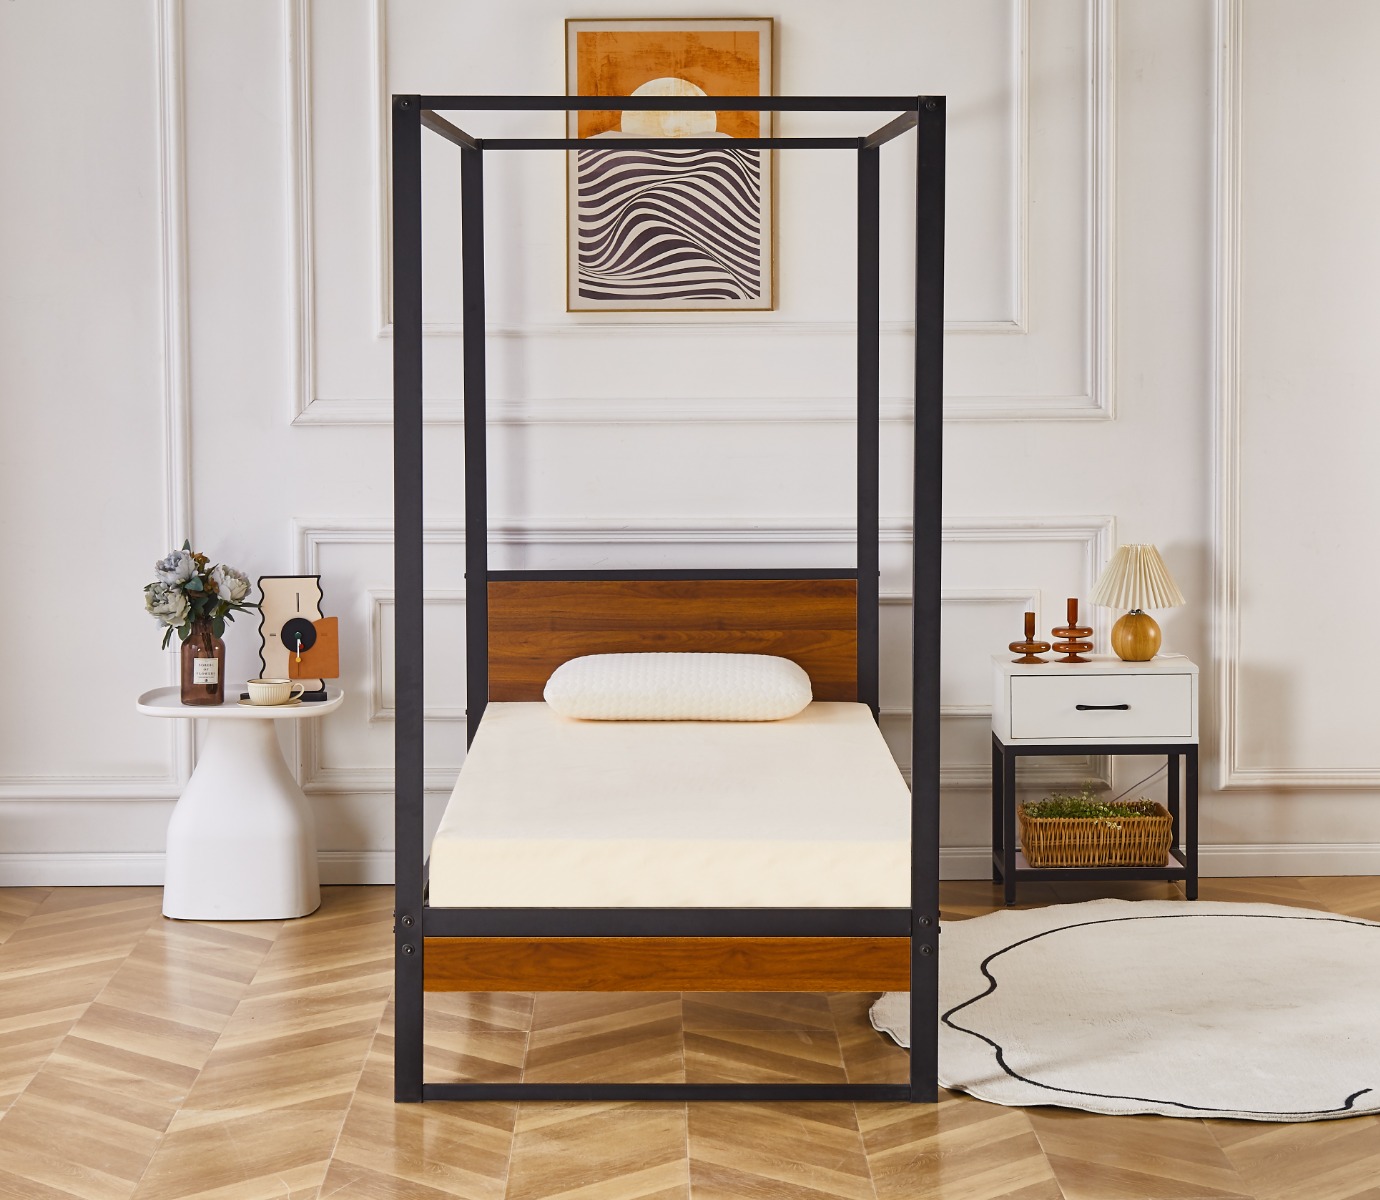 Flair Rockford Wooden Metal 4 Poster Bed Frame Single